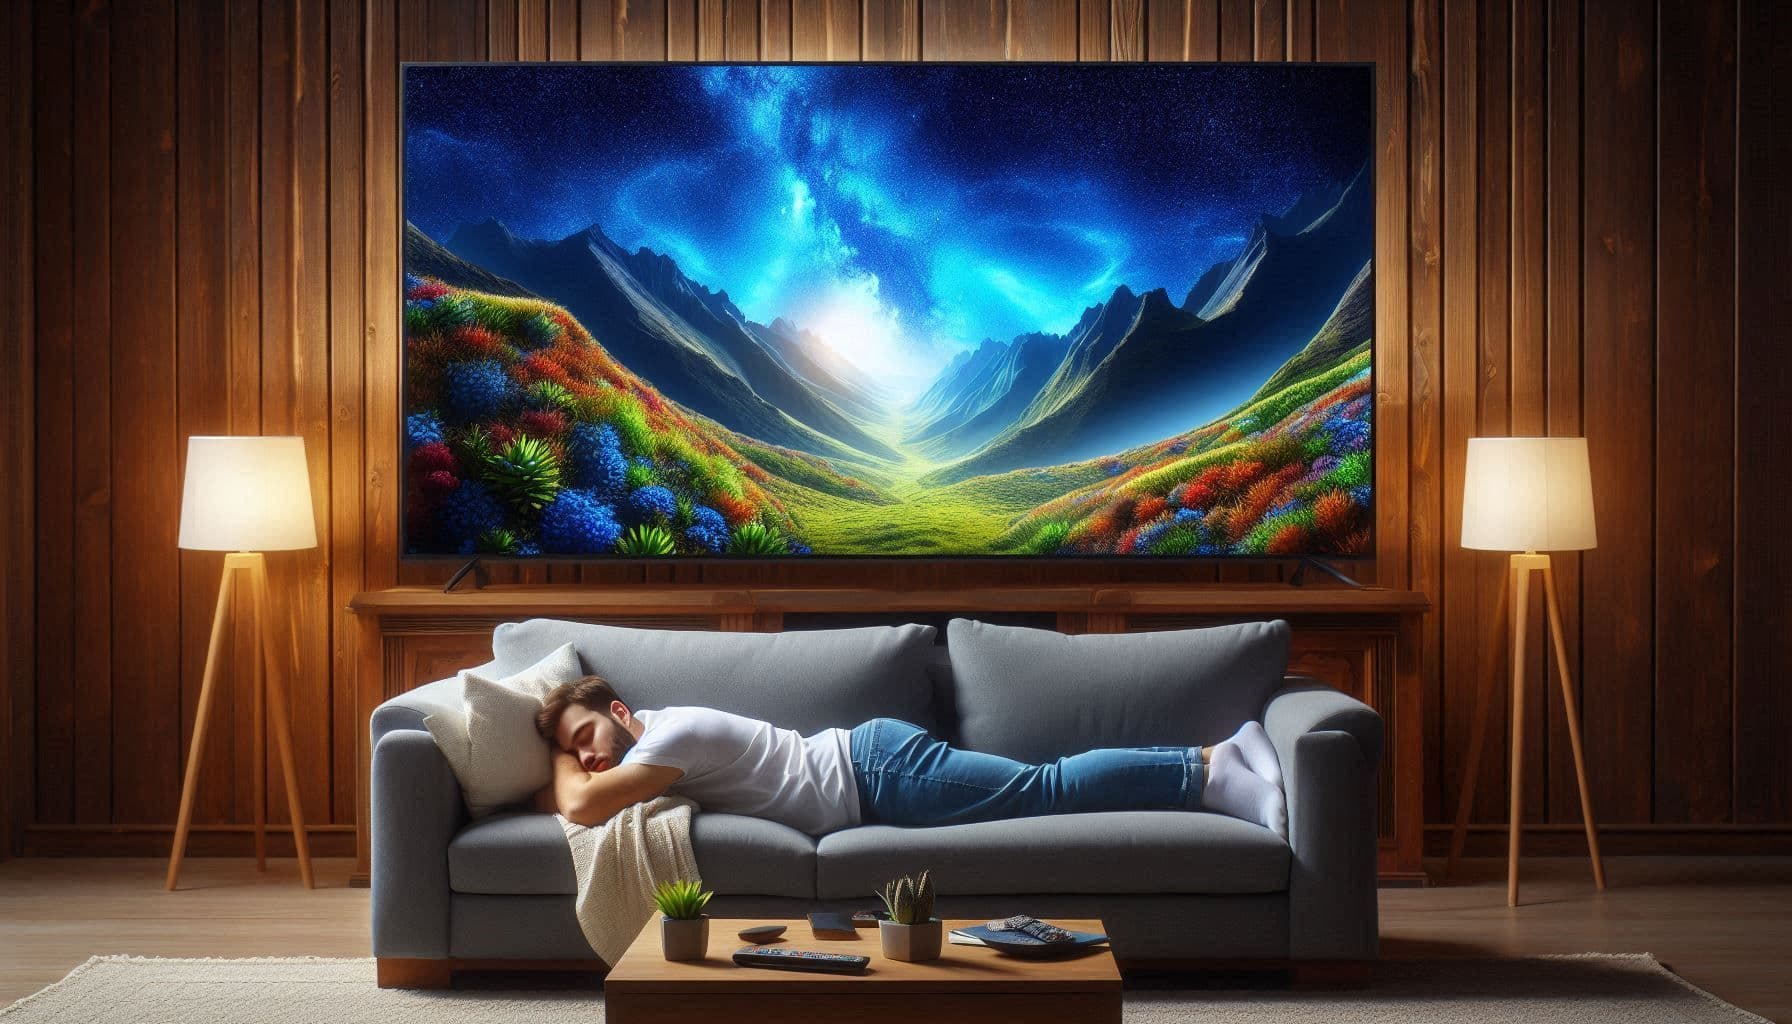 LG Display claims OLED TVs are more "sleep friendly" than any other